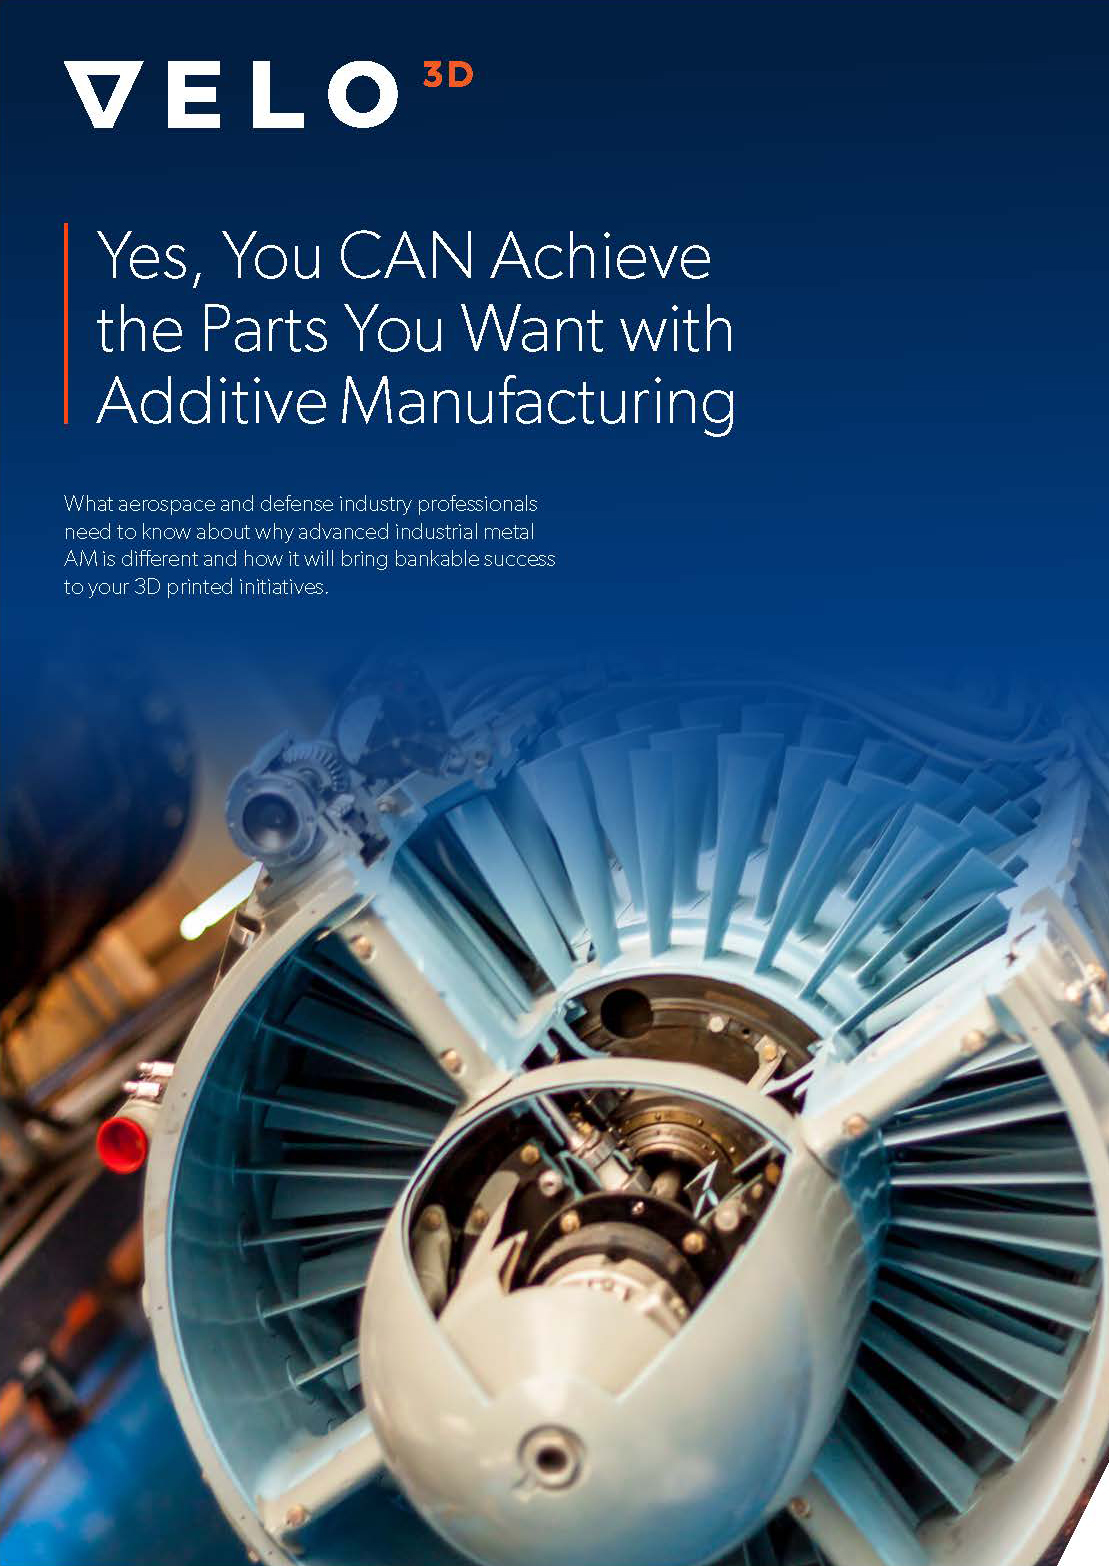 Yes, You CAN Achieve the Parts You Want with Additive Manufacturing